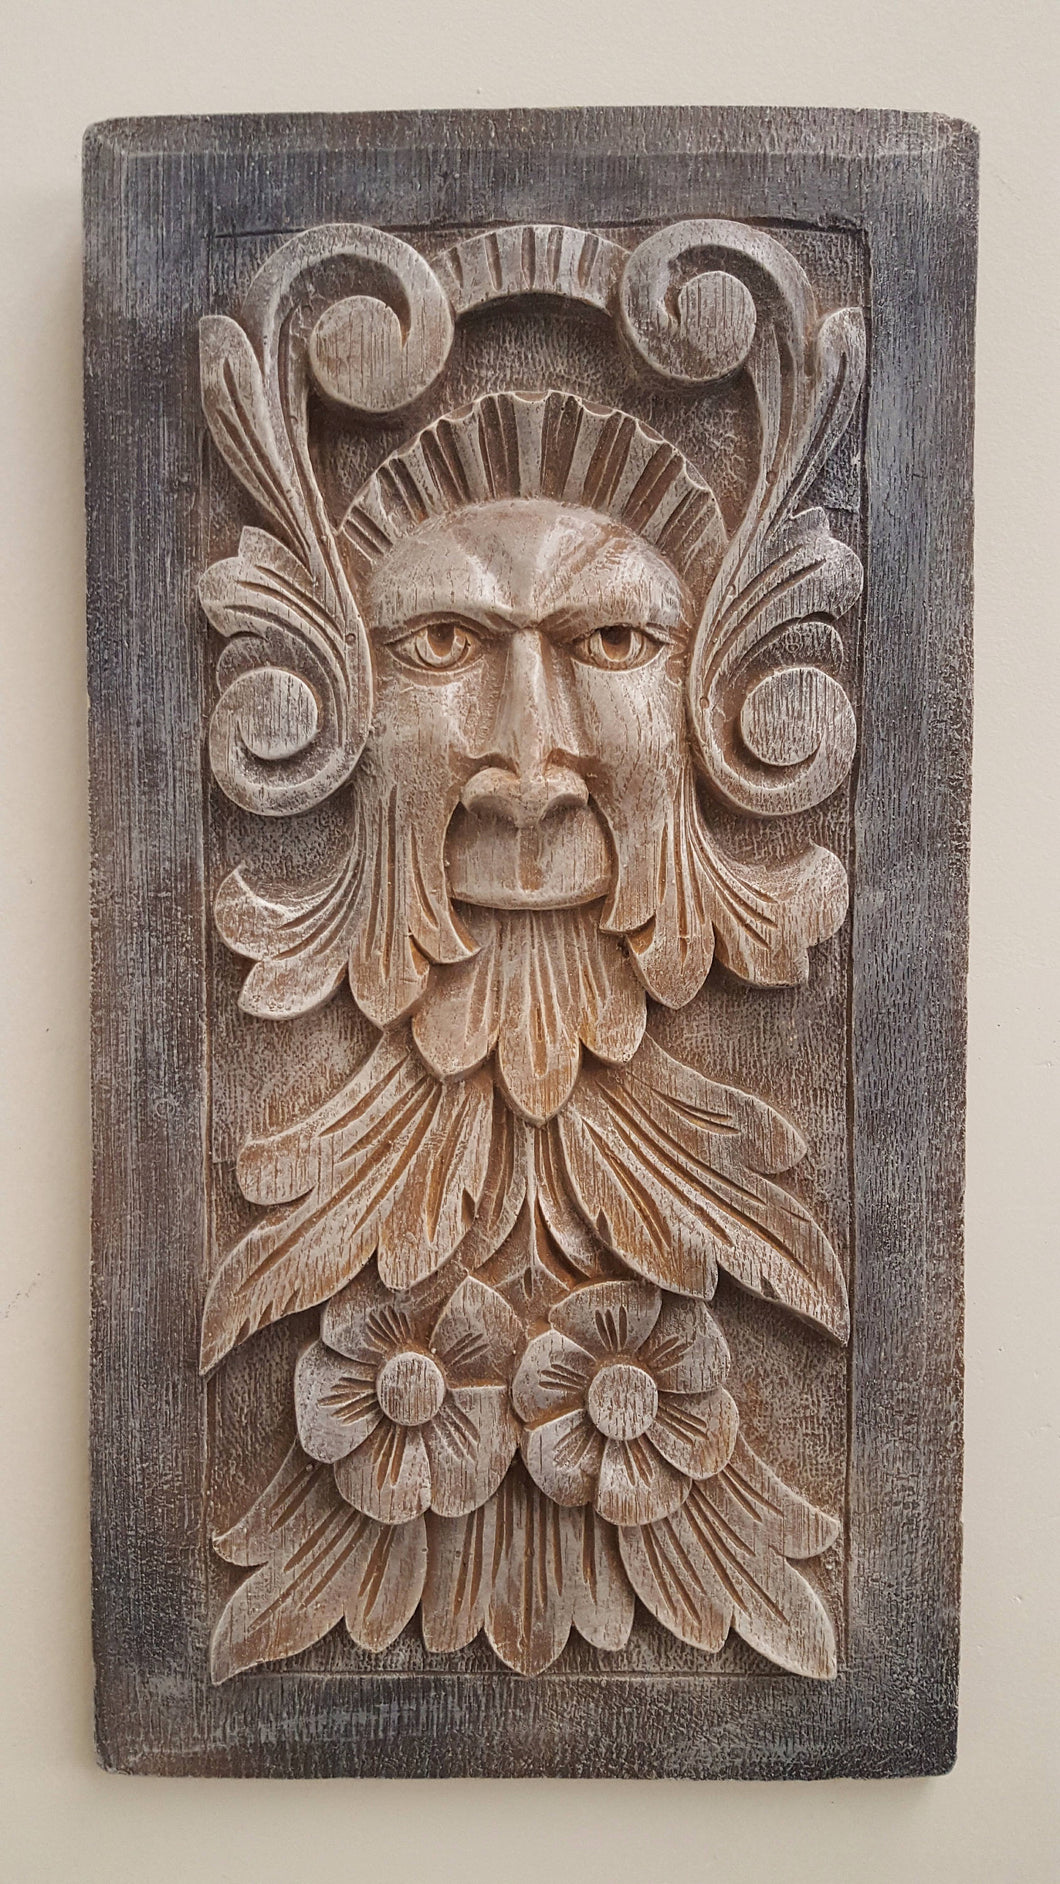 Exclusive Green man Pan Mythical Art Medieval Face Panel